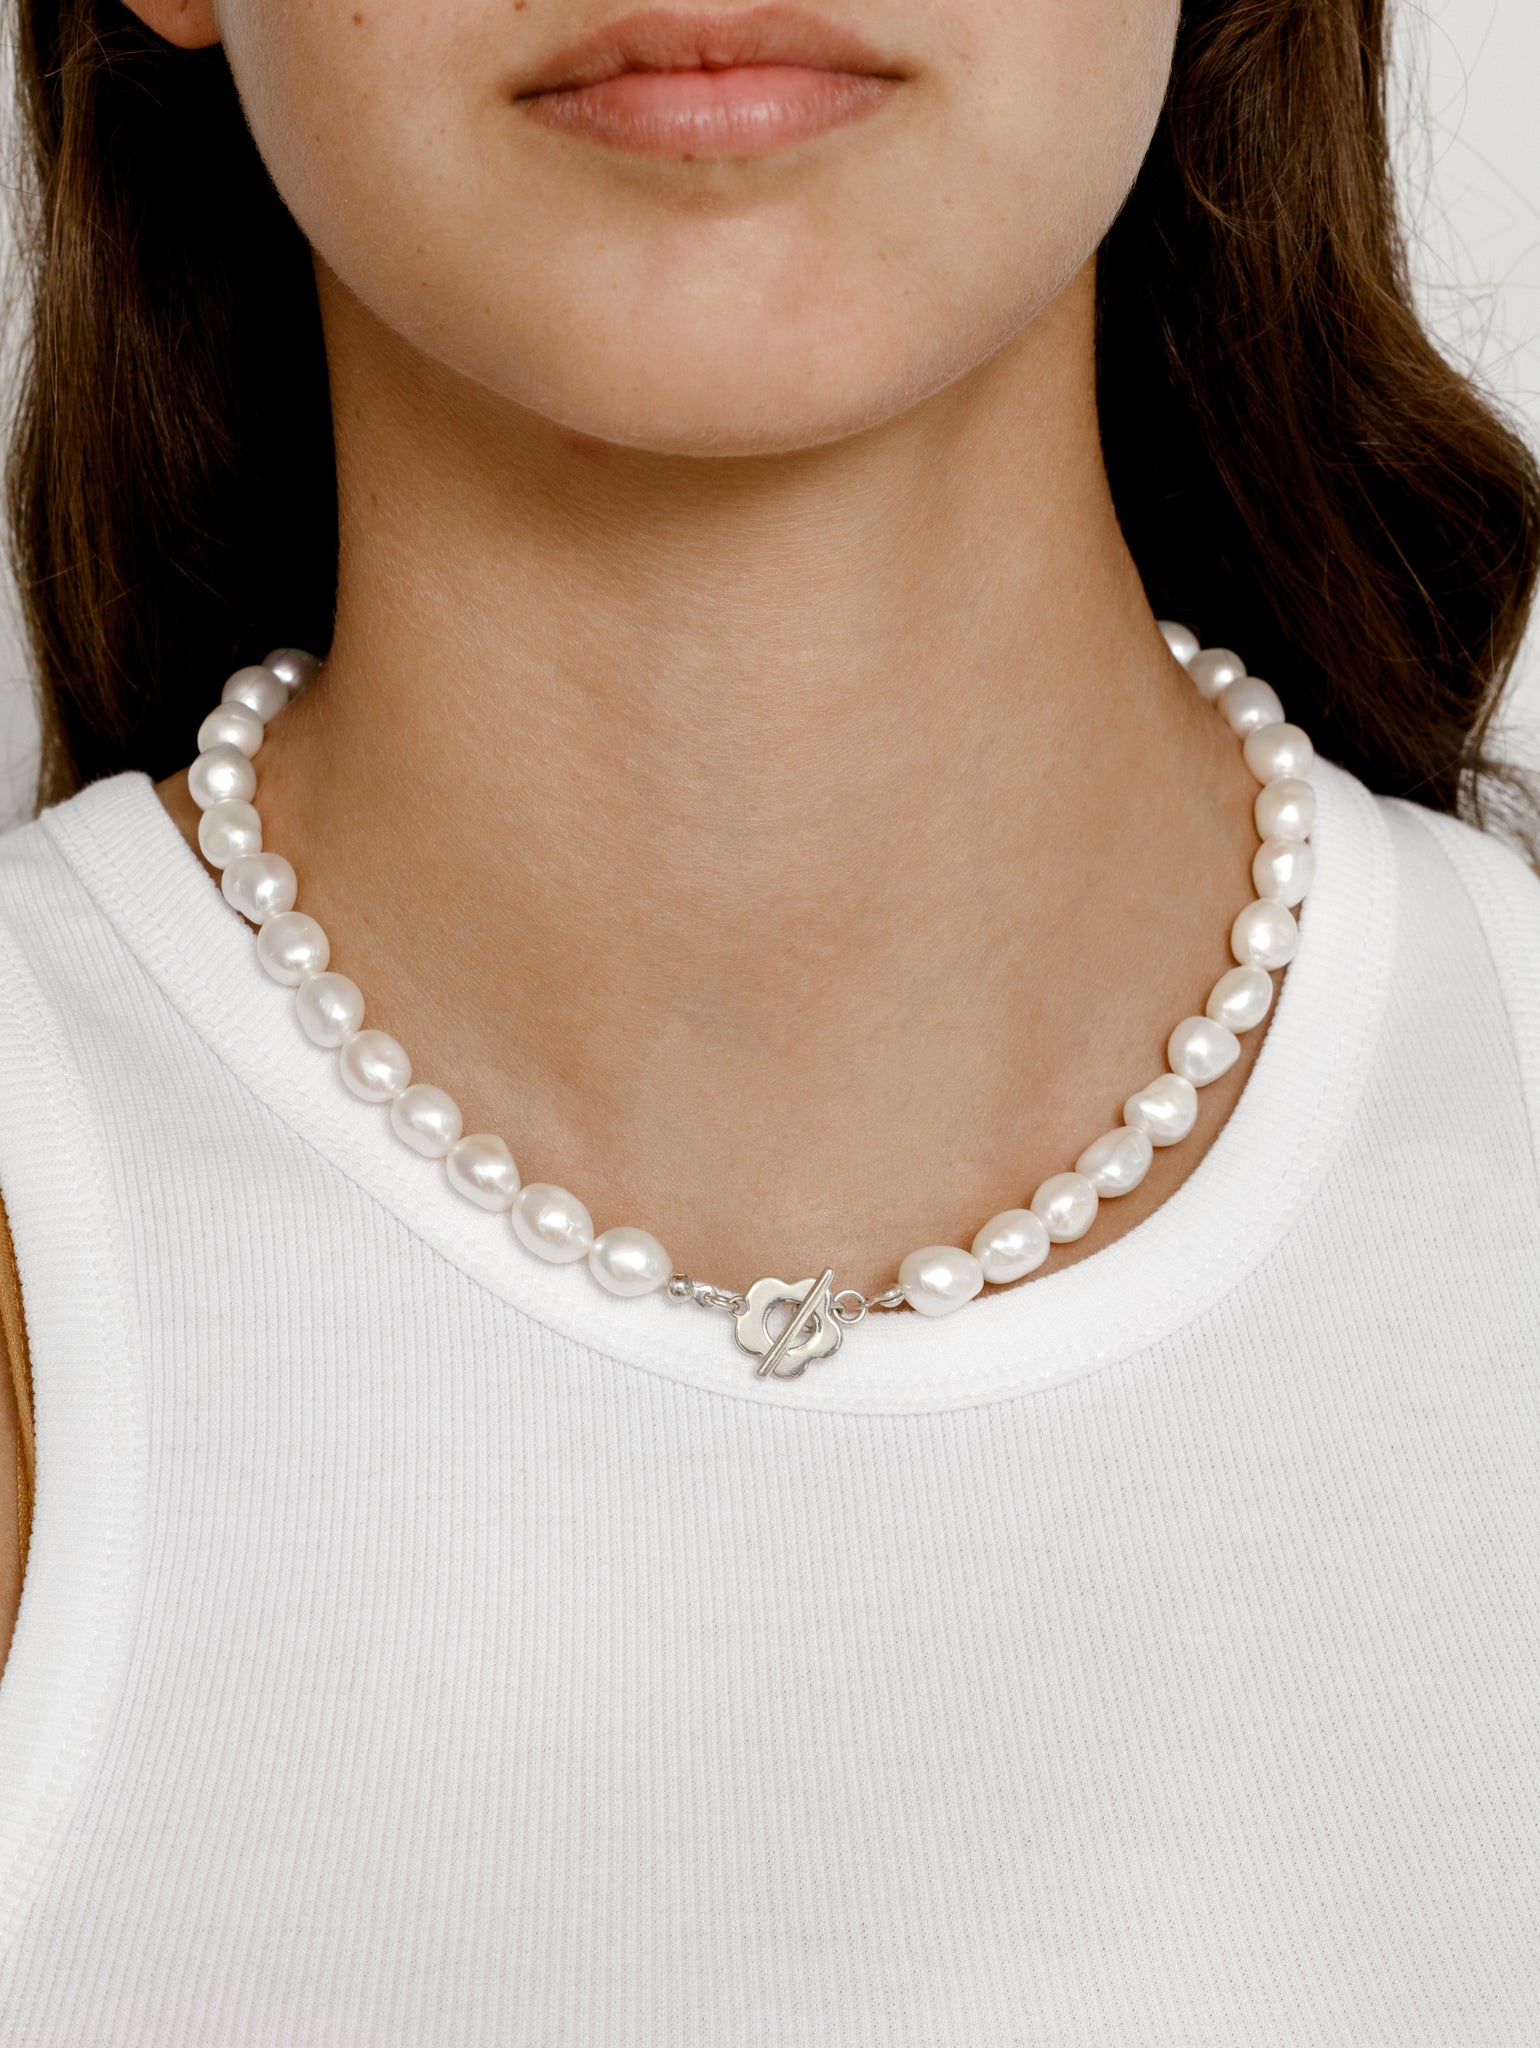 Wolf Circus Pearl Necklace w/ Sterling Silver Flower Toggle | Freshwater Pearls | Lola Pearl Necklace-Necklaces-wolfcircus.com